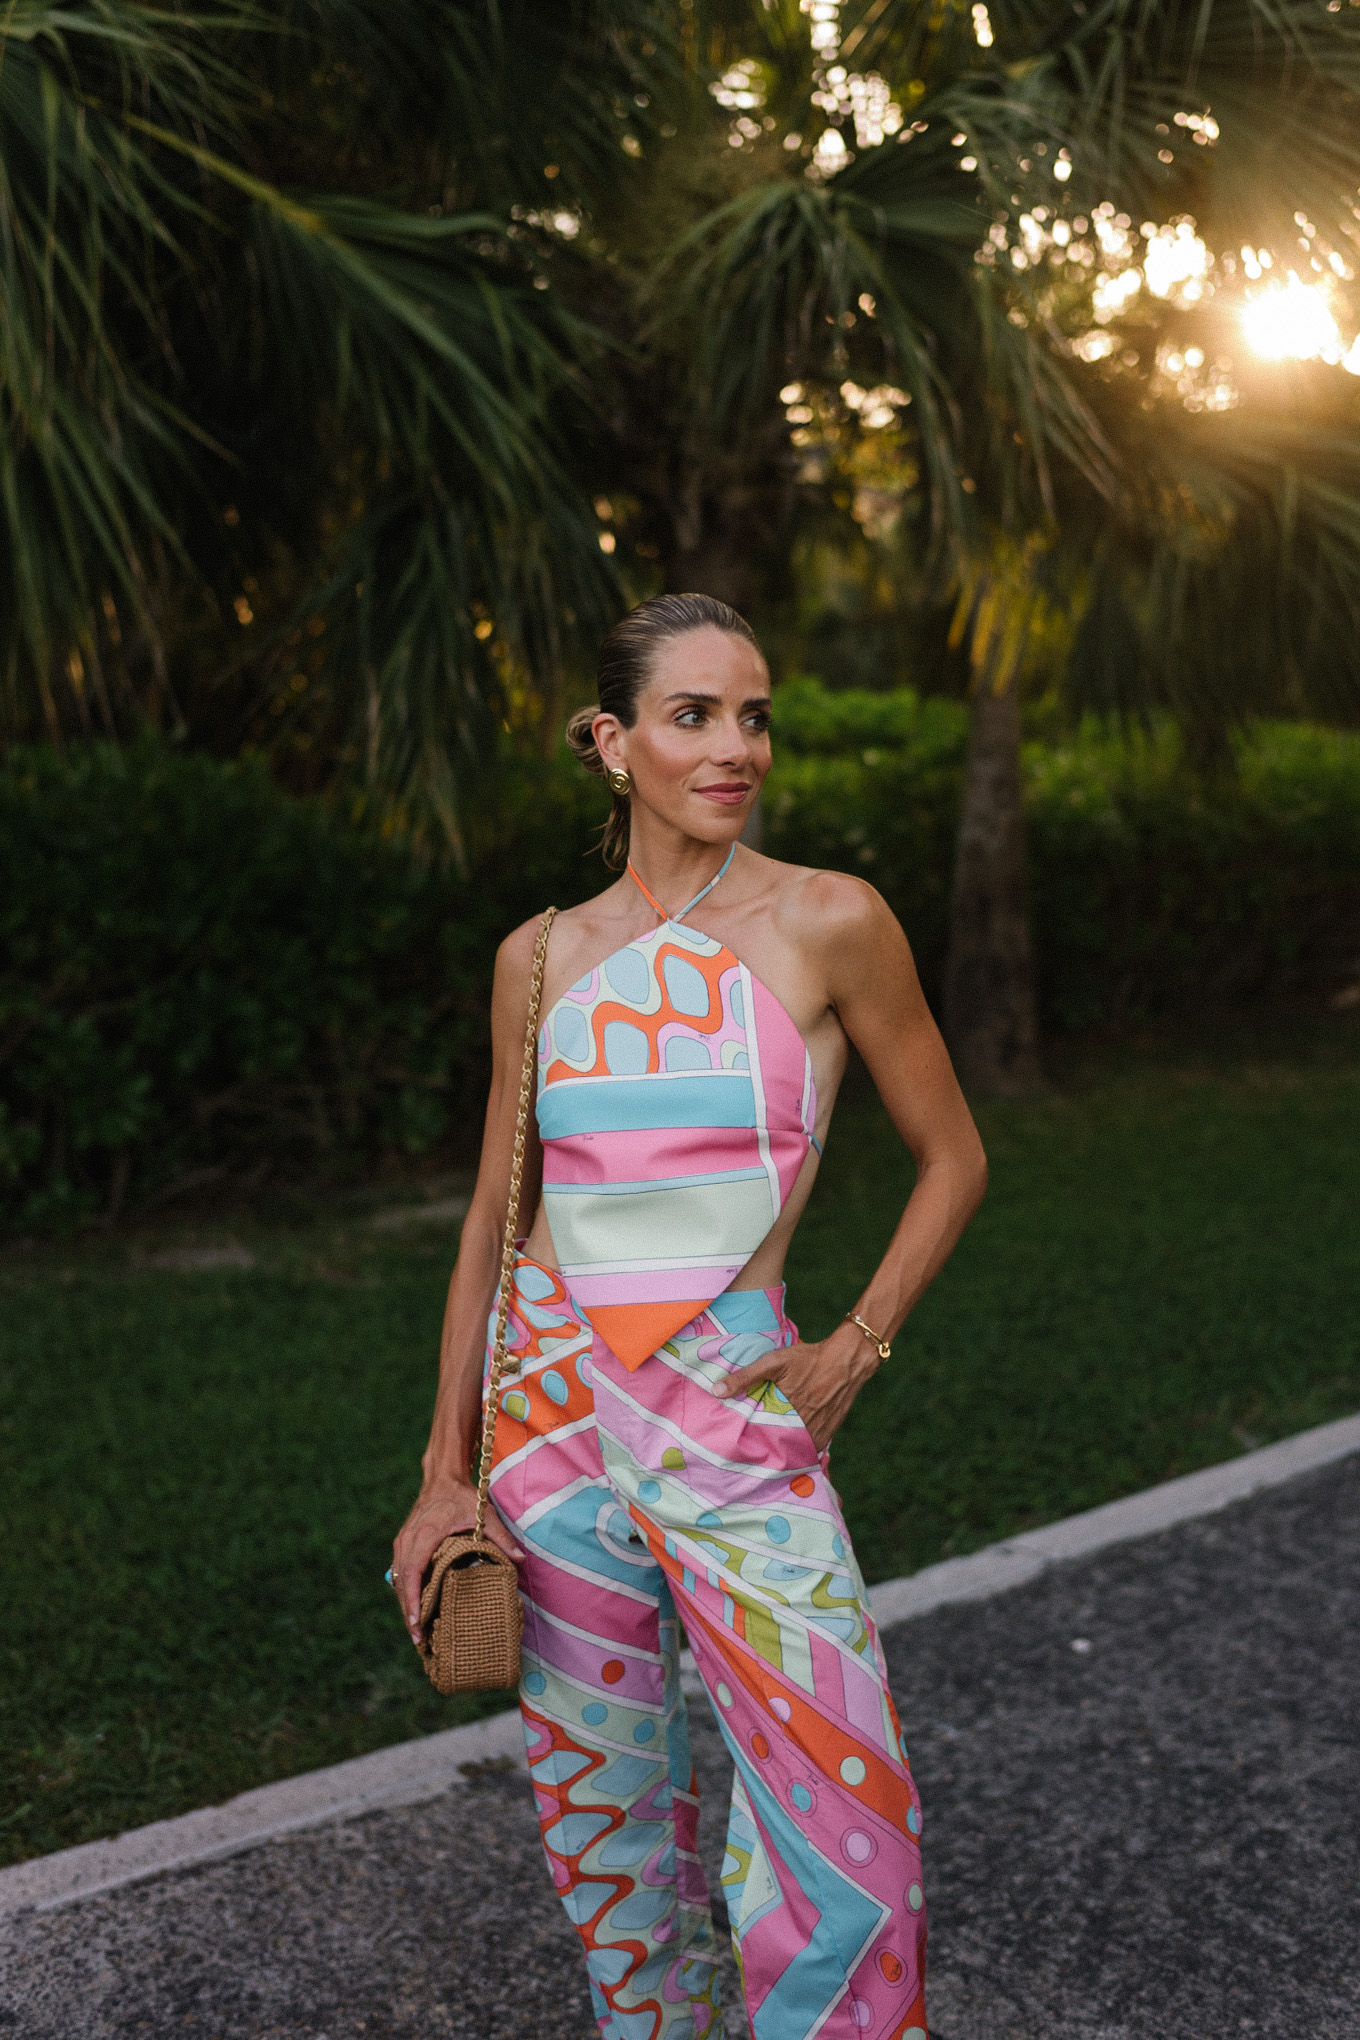 Bright patterned tank top and pants set